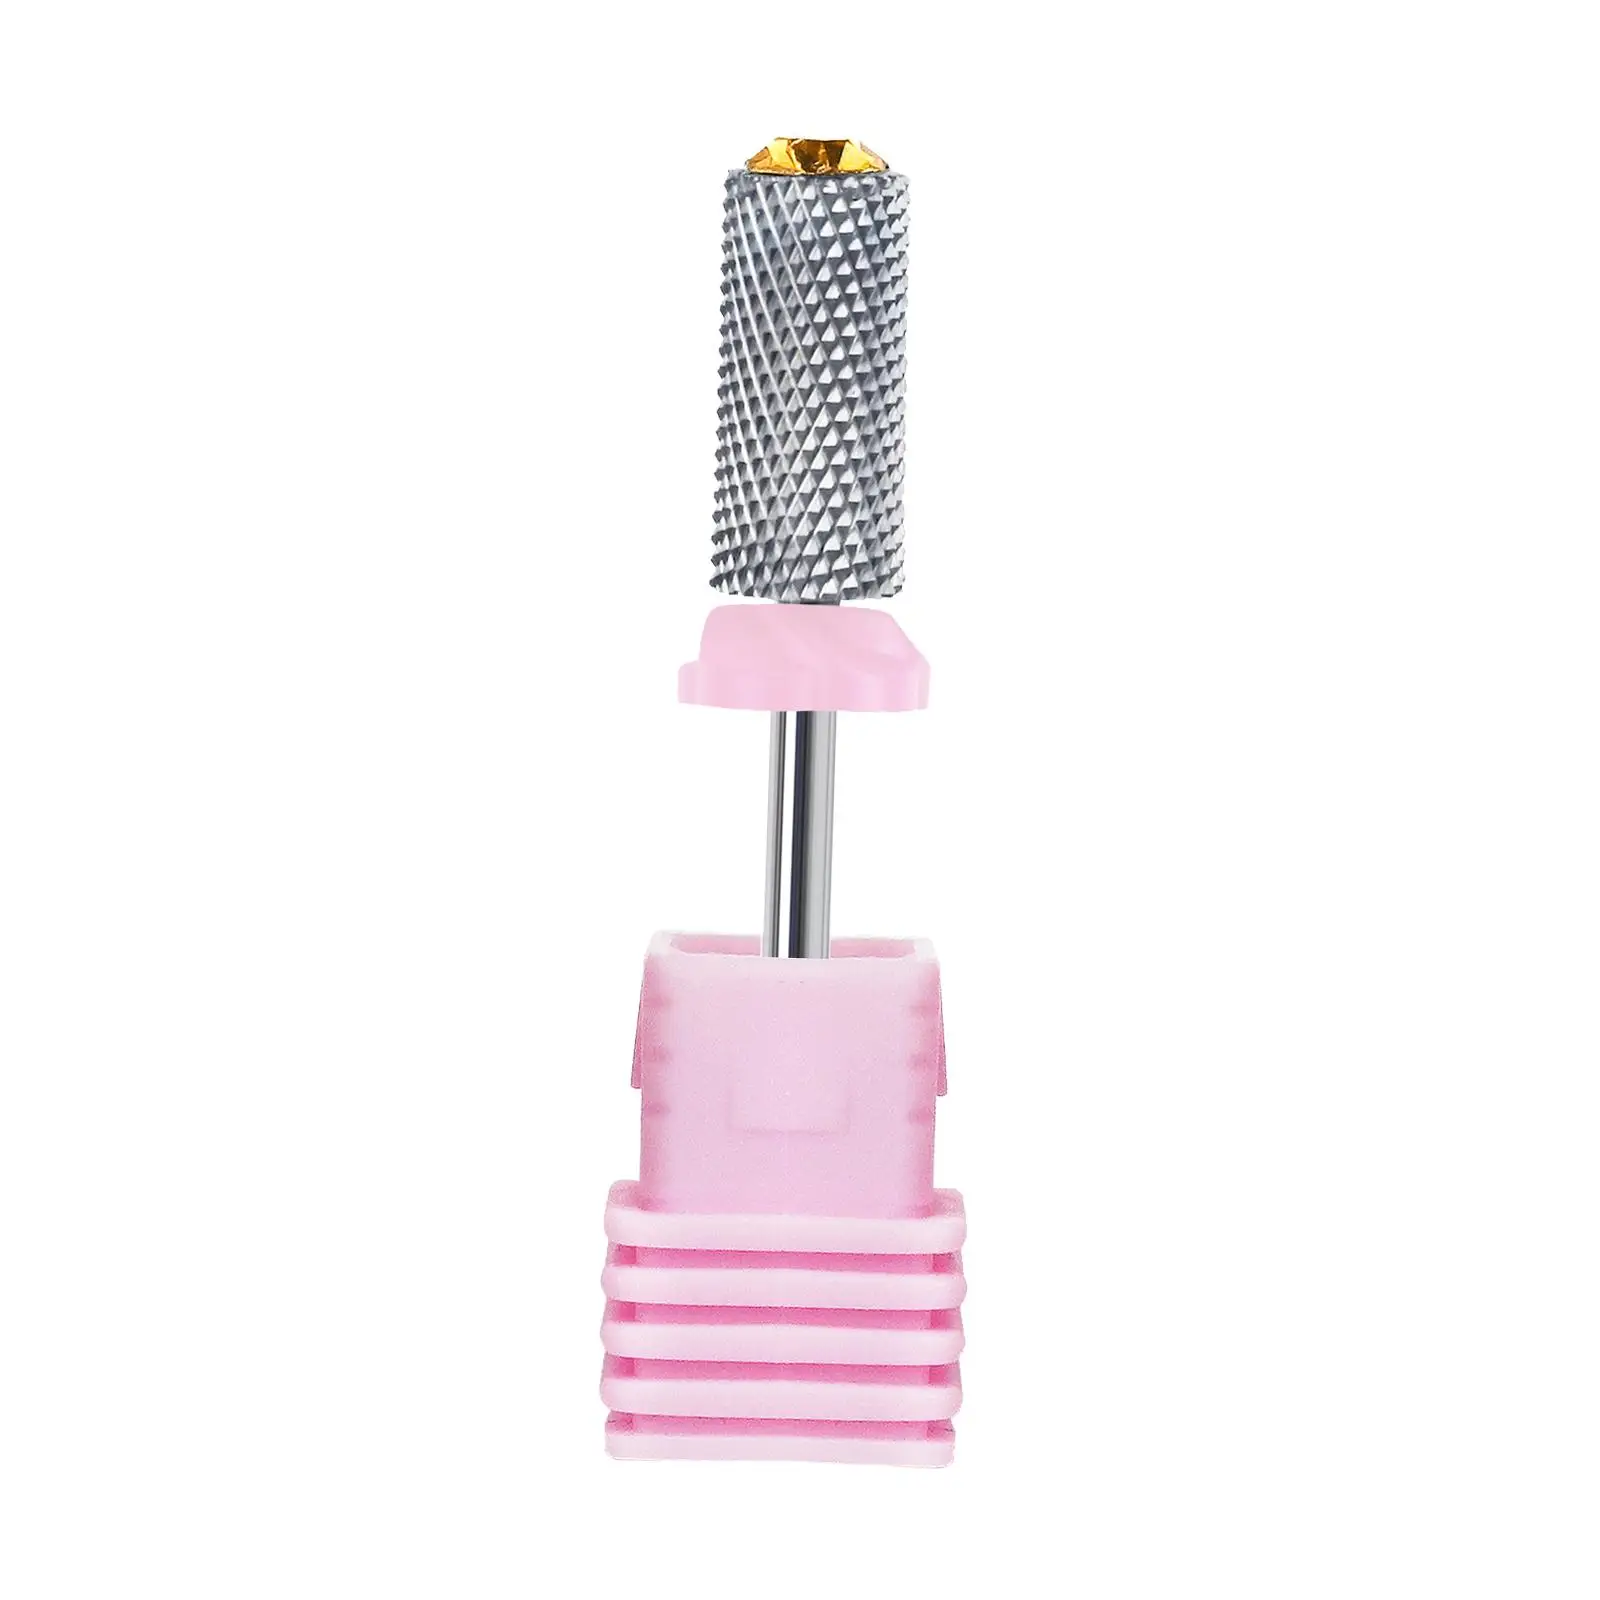 Nail Drill Bit Accessories Manicure Pedicure Tool Nail Art Tool Rotary Burrs Cuticle Remover Bit for Acrylic Gel Nails Salon Use